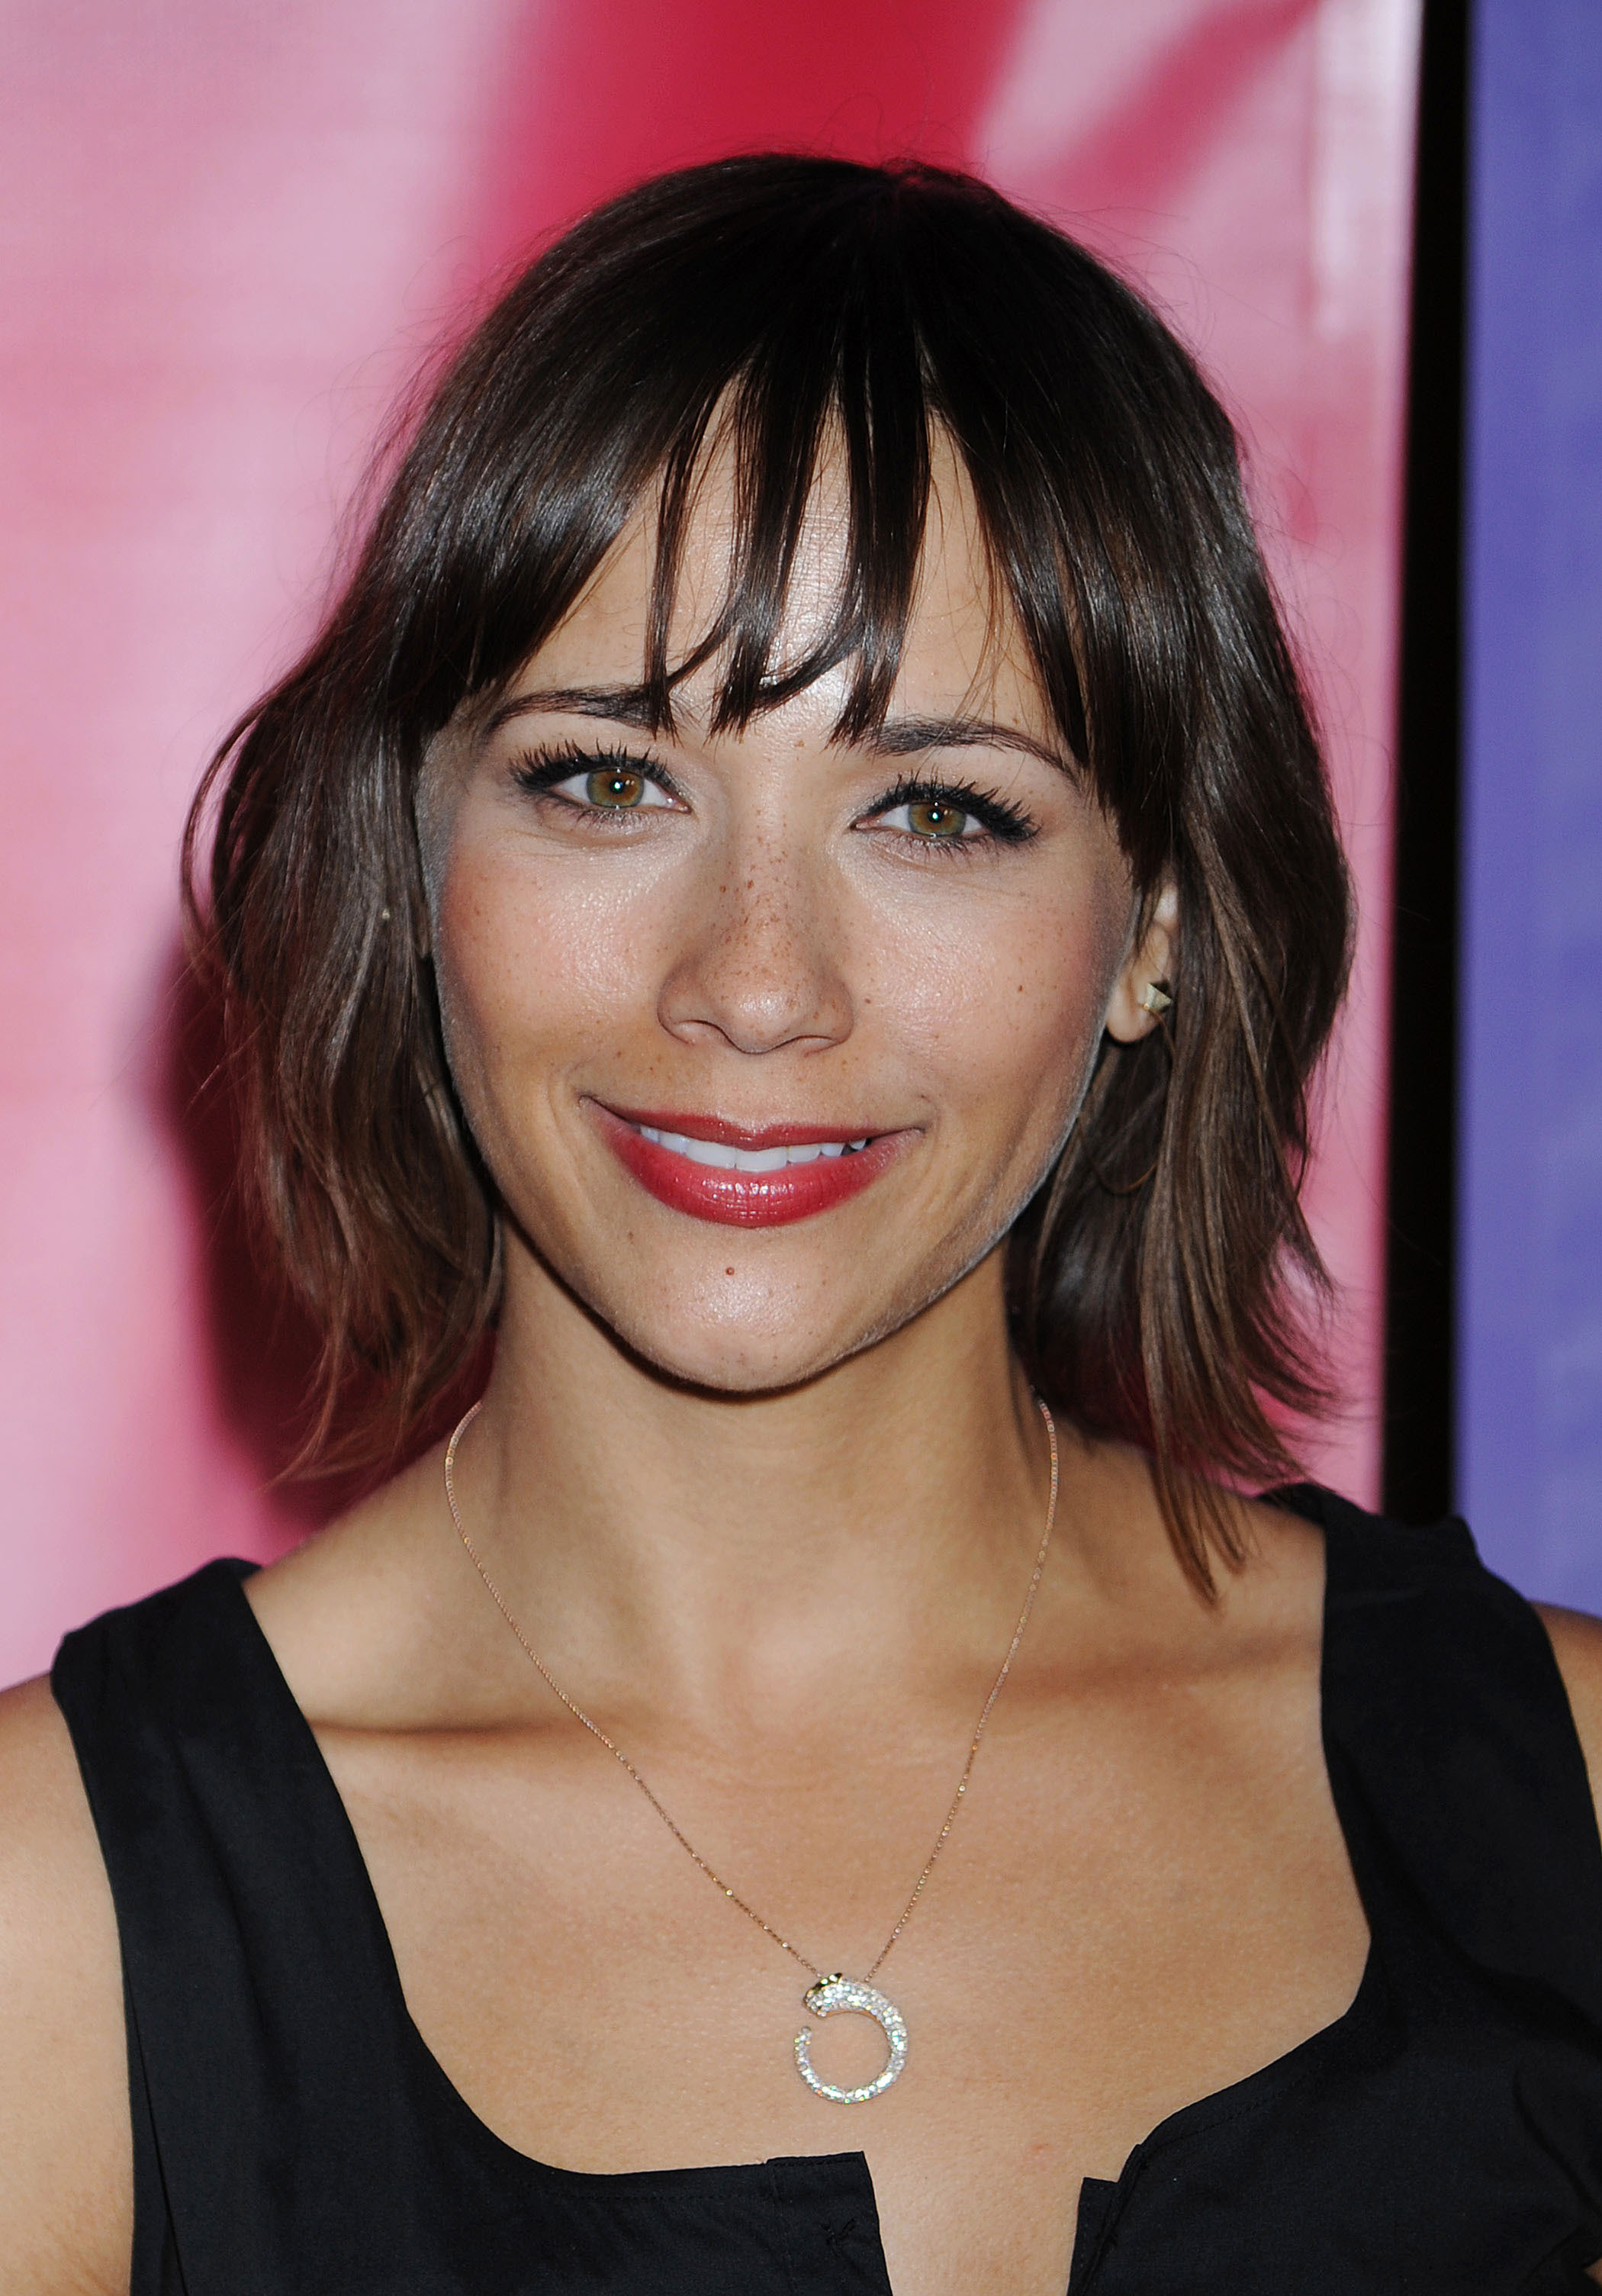 Rashida Jones arrives at NBC Universal's Press Tour Cocktail Party in Pasadena, California, on January 10, 2010. | Source: Getty Images